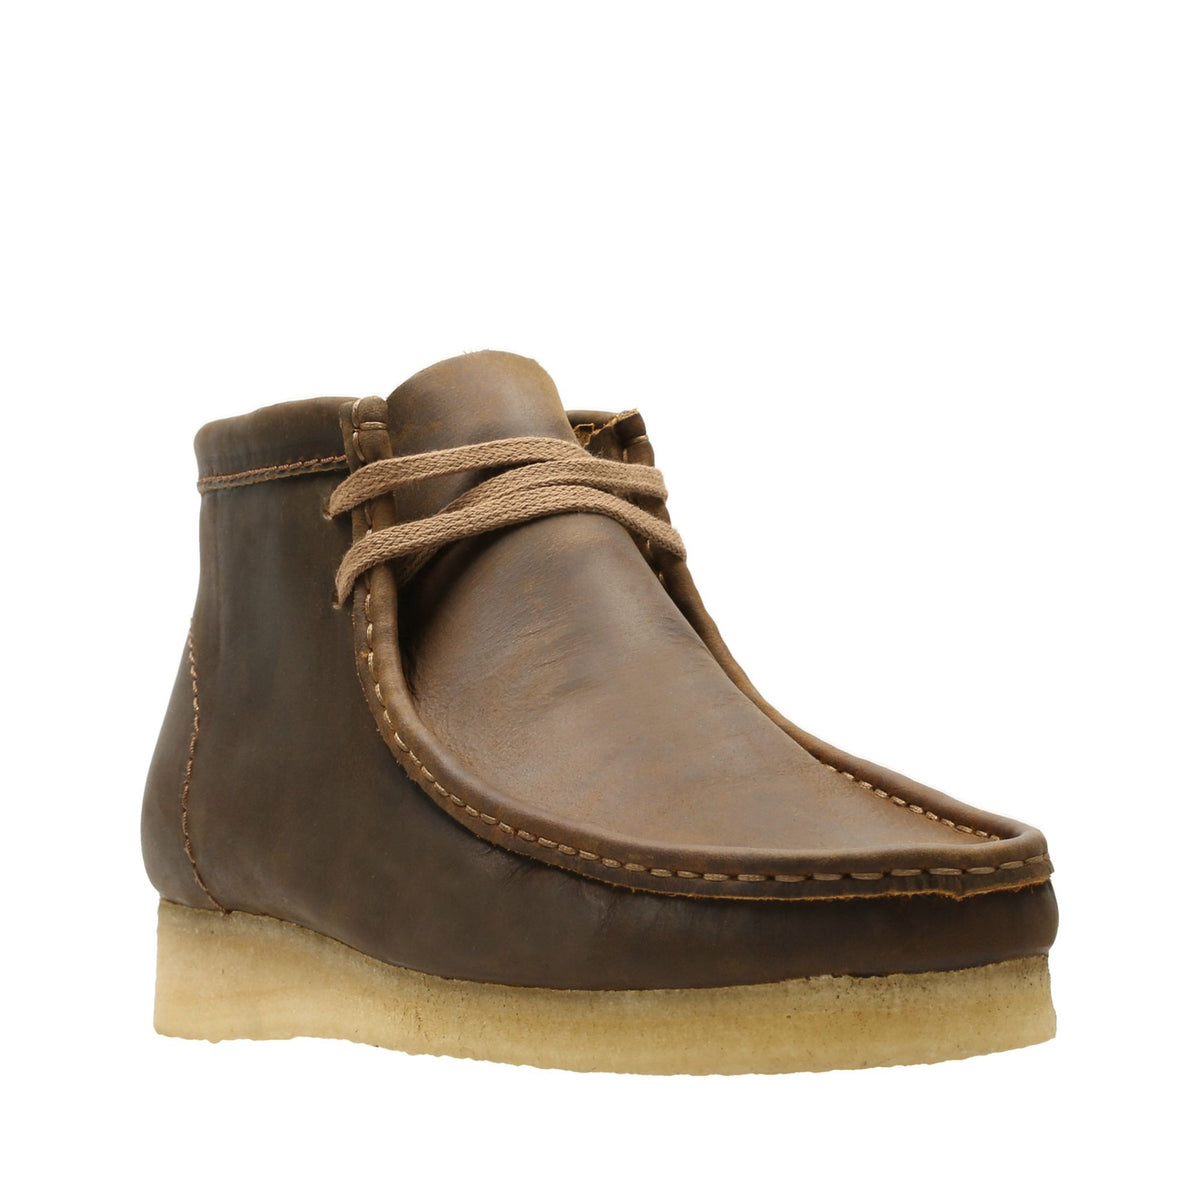 CLARKS WALLABEE HI - BEESWAX – Lazarus of Moultrie